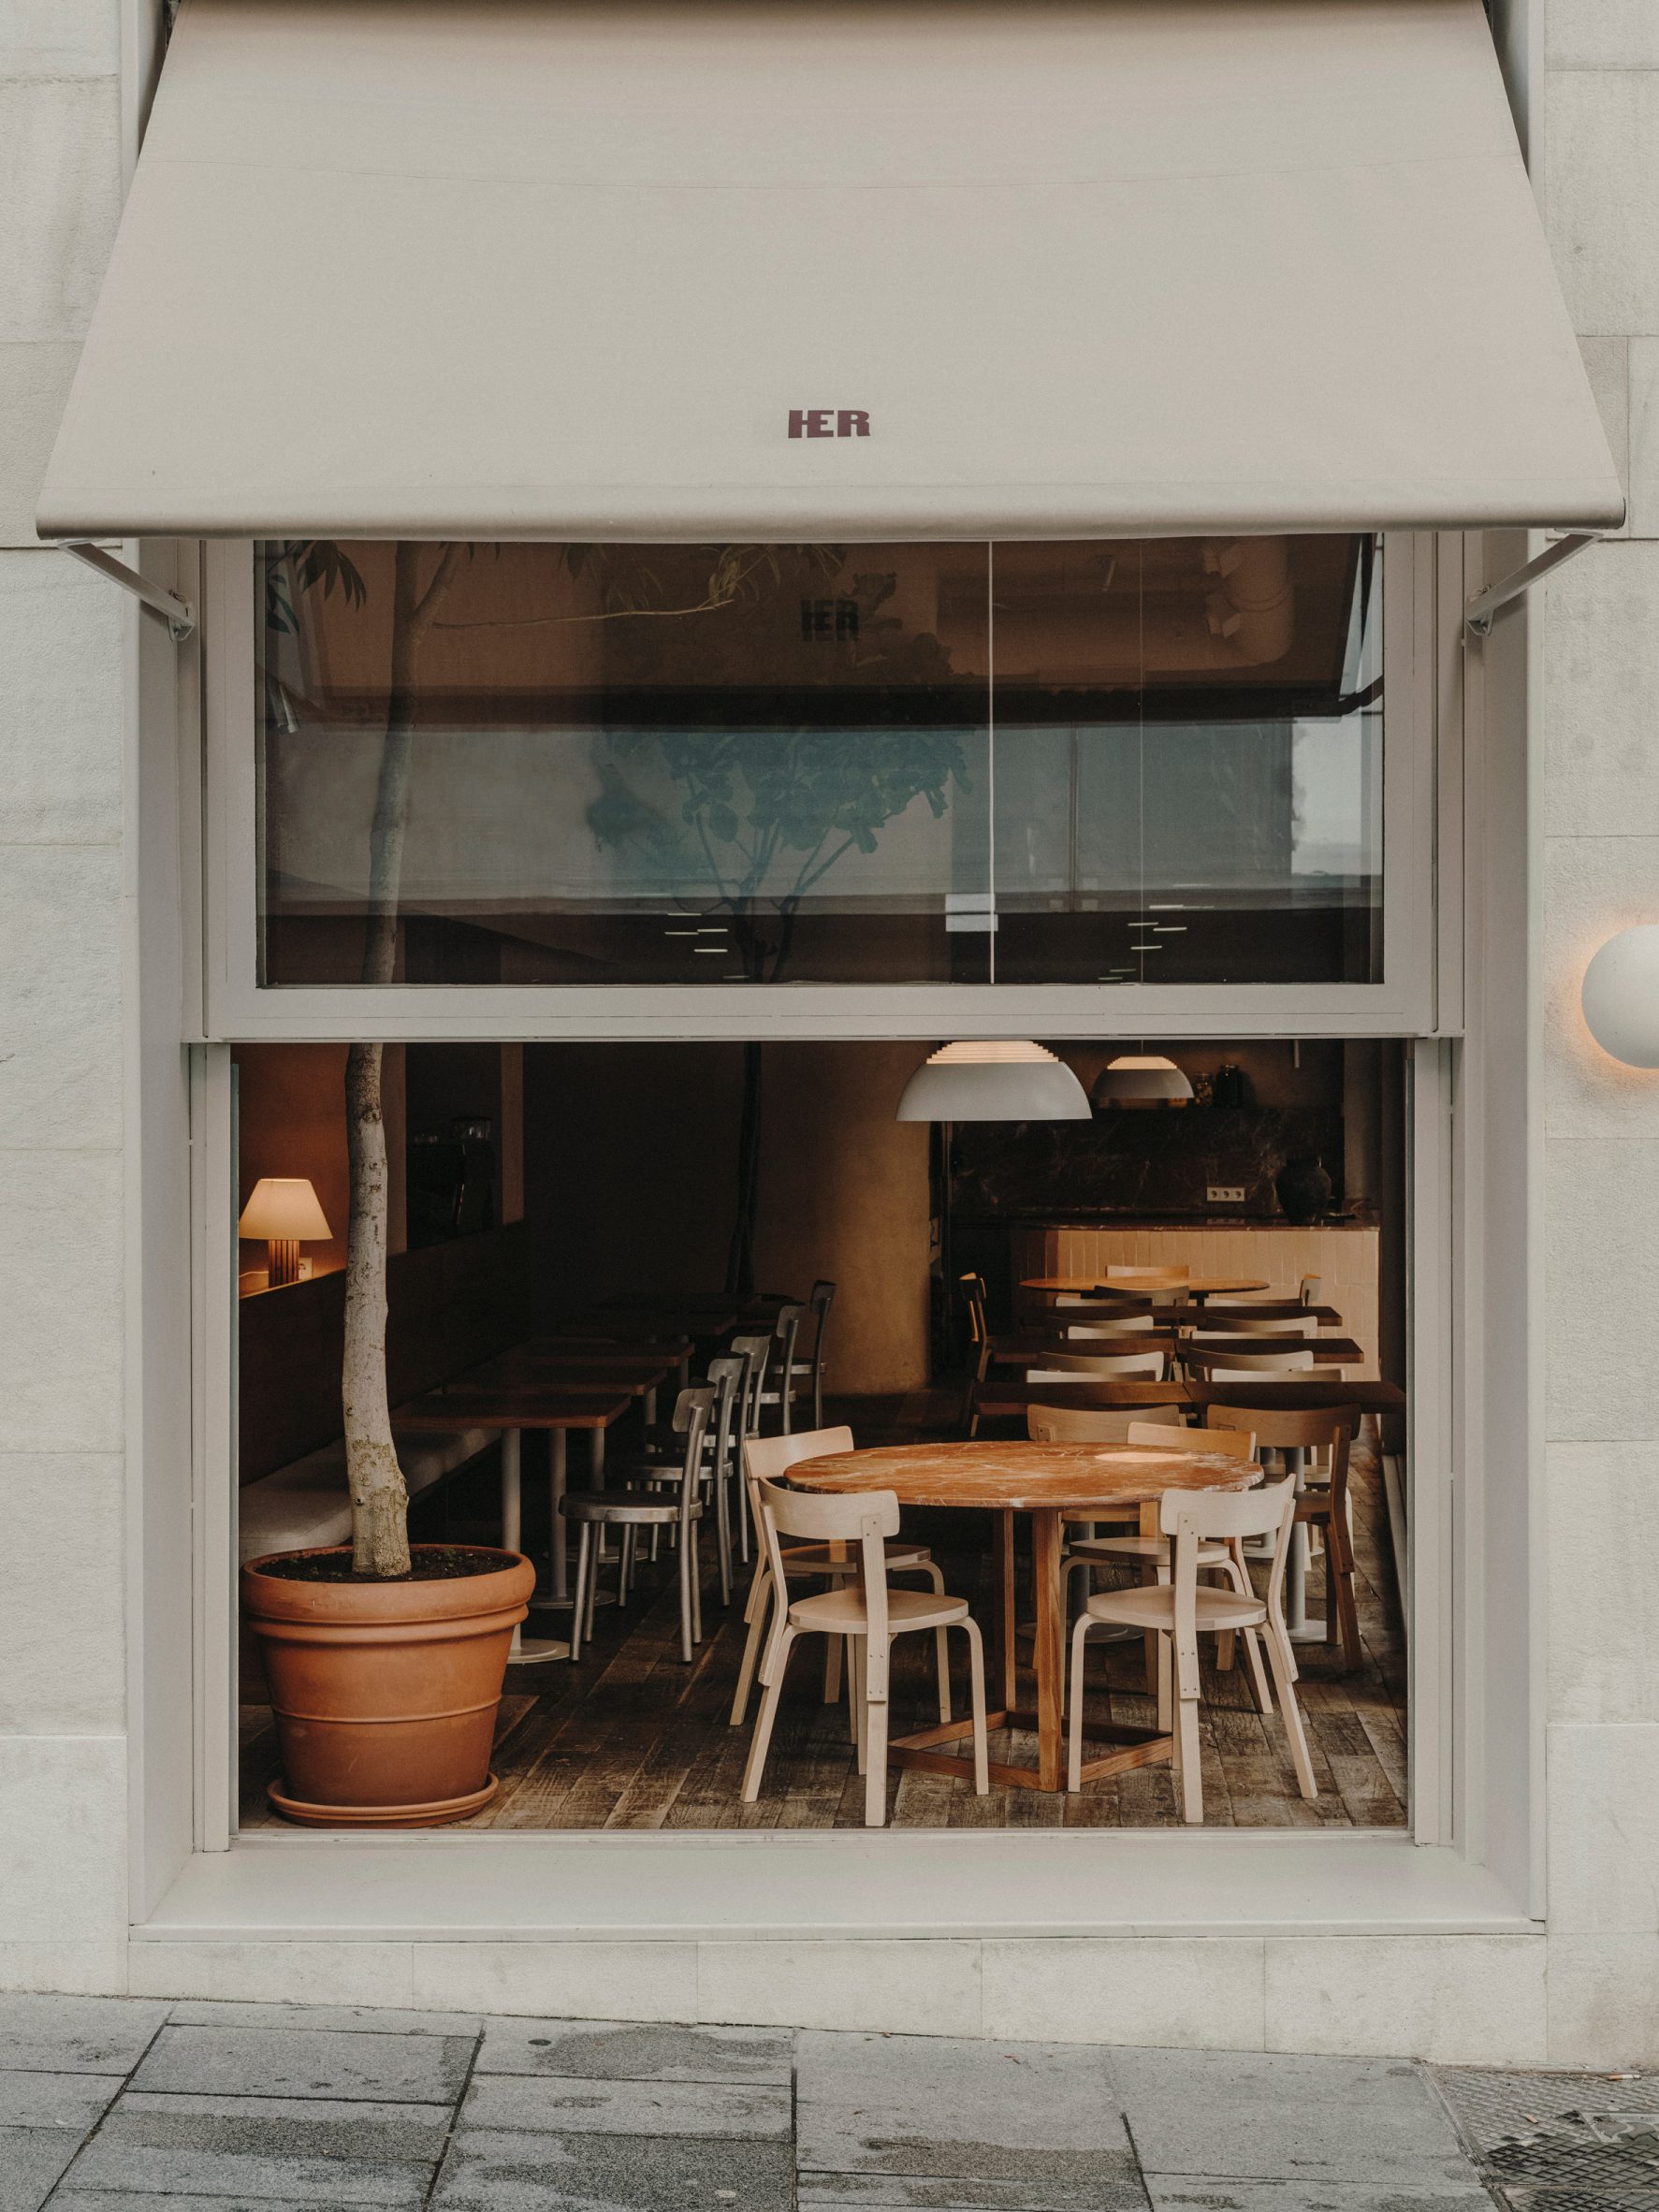 A view into the window of Hermosilla, an earth-toned restaurant in Madrid